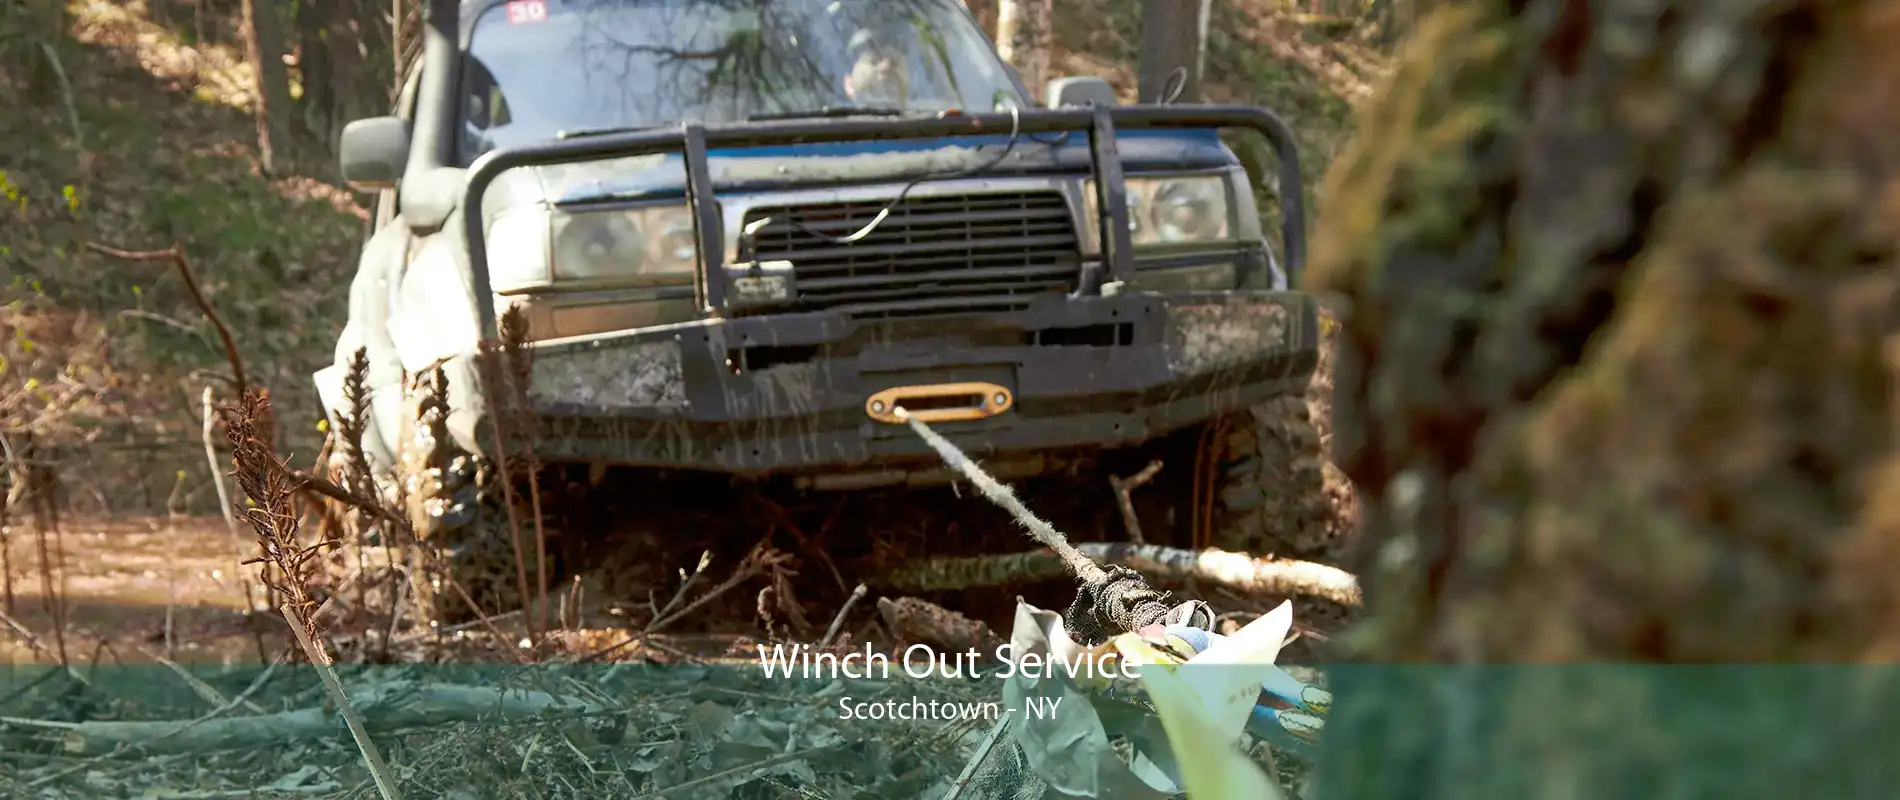 Winch Out Service Scotchtown - NY